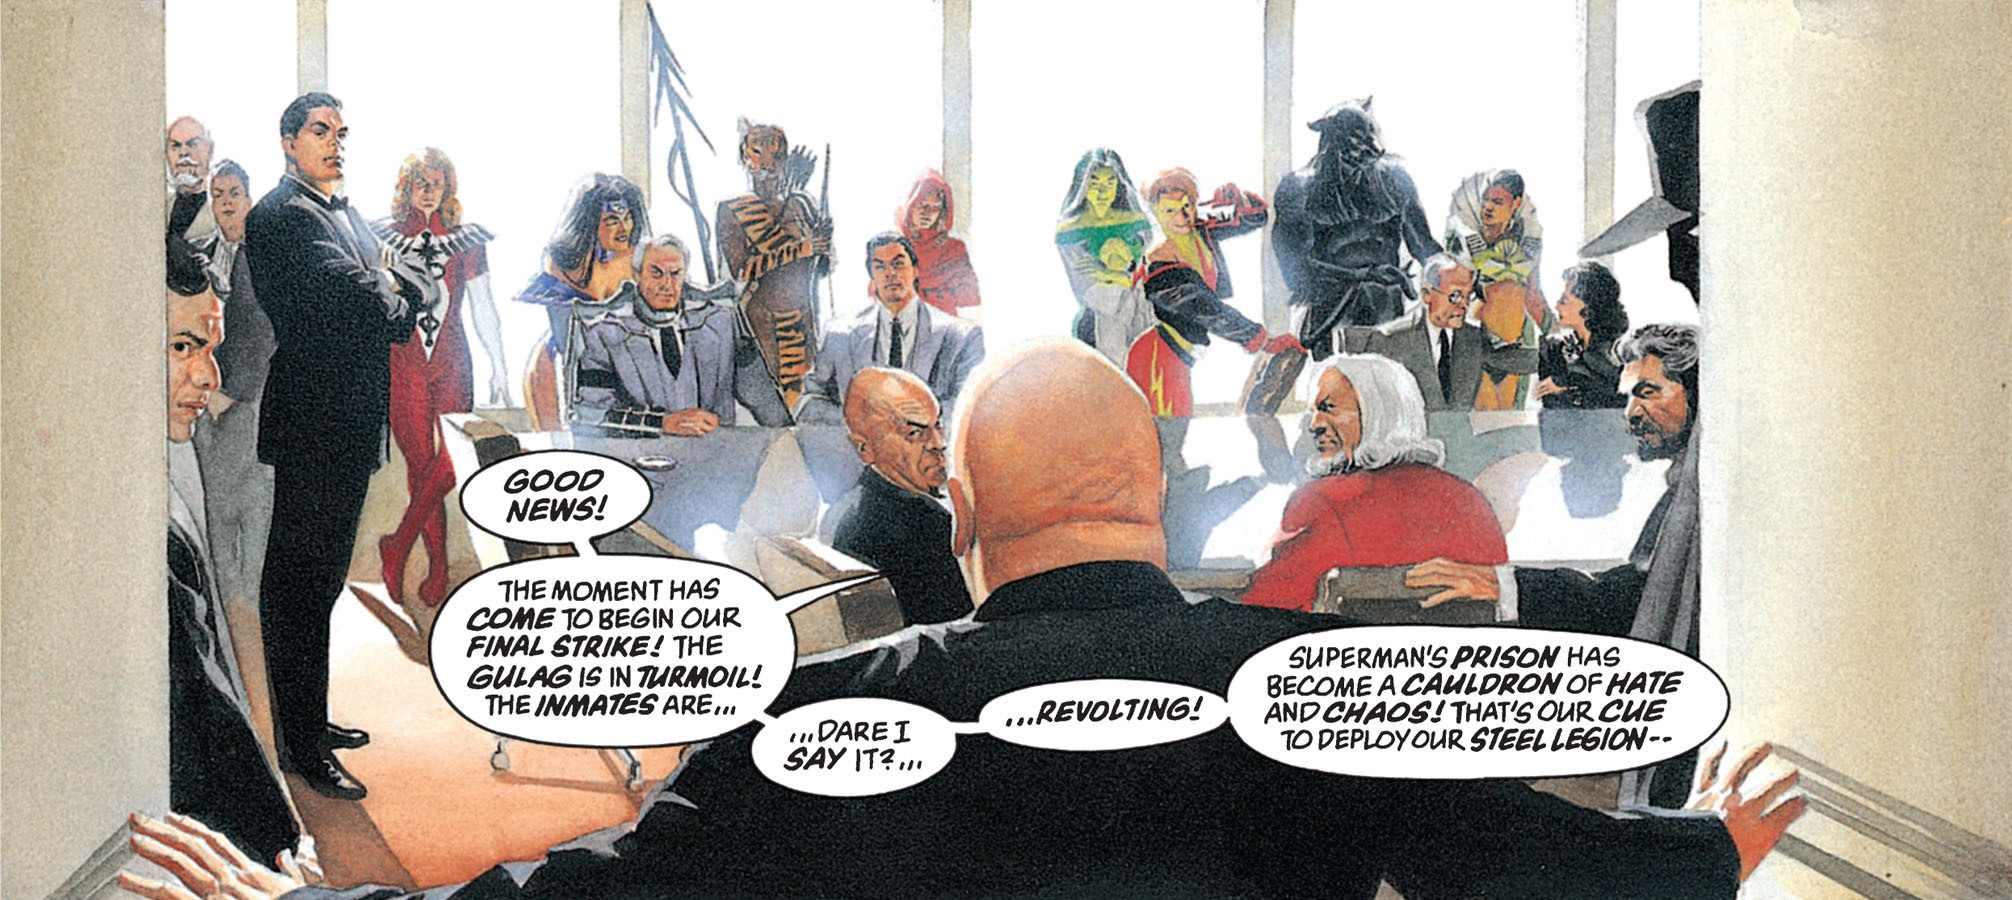 Lex Luthor enters the board room meeting place of the Mankind Liberation Front. In this scene, they are joined by Batman and his army.